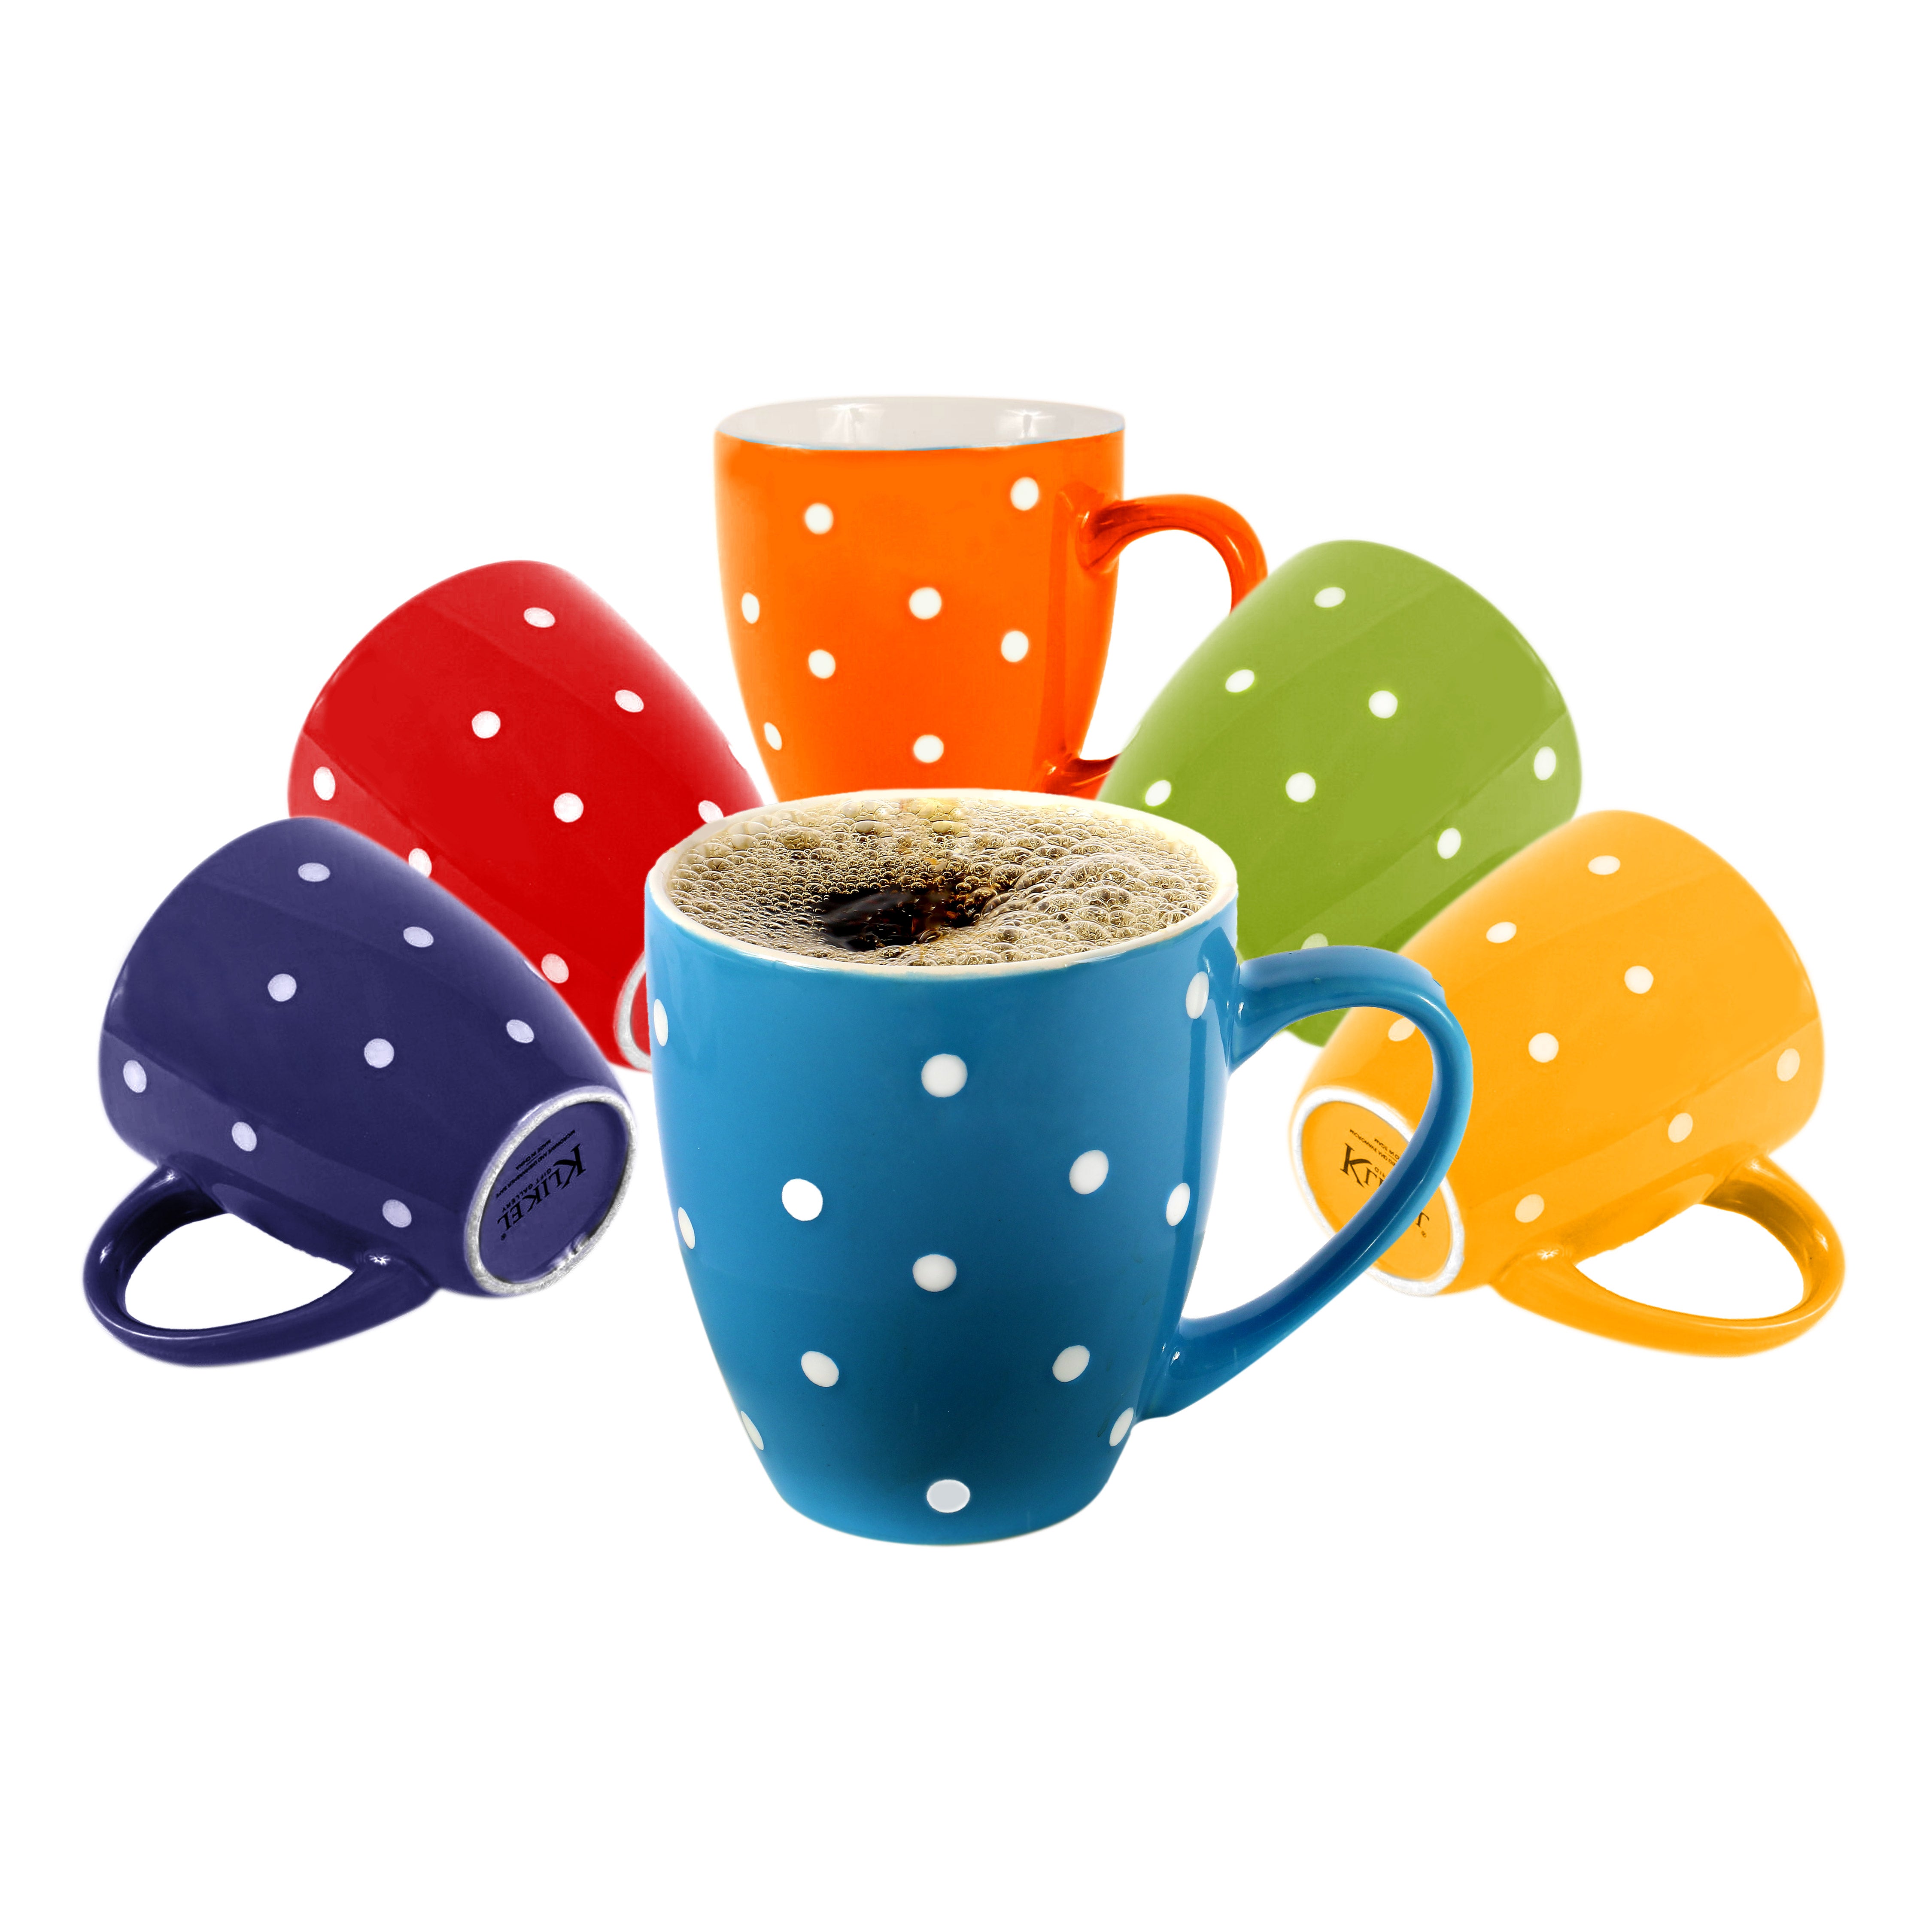 Schliersee 12 Oz Coffee Mugs Set of 6, Assorted Colors